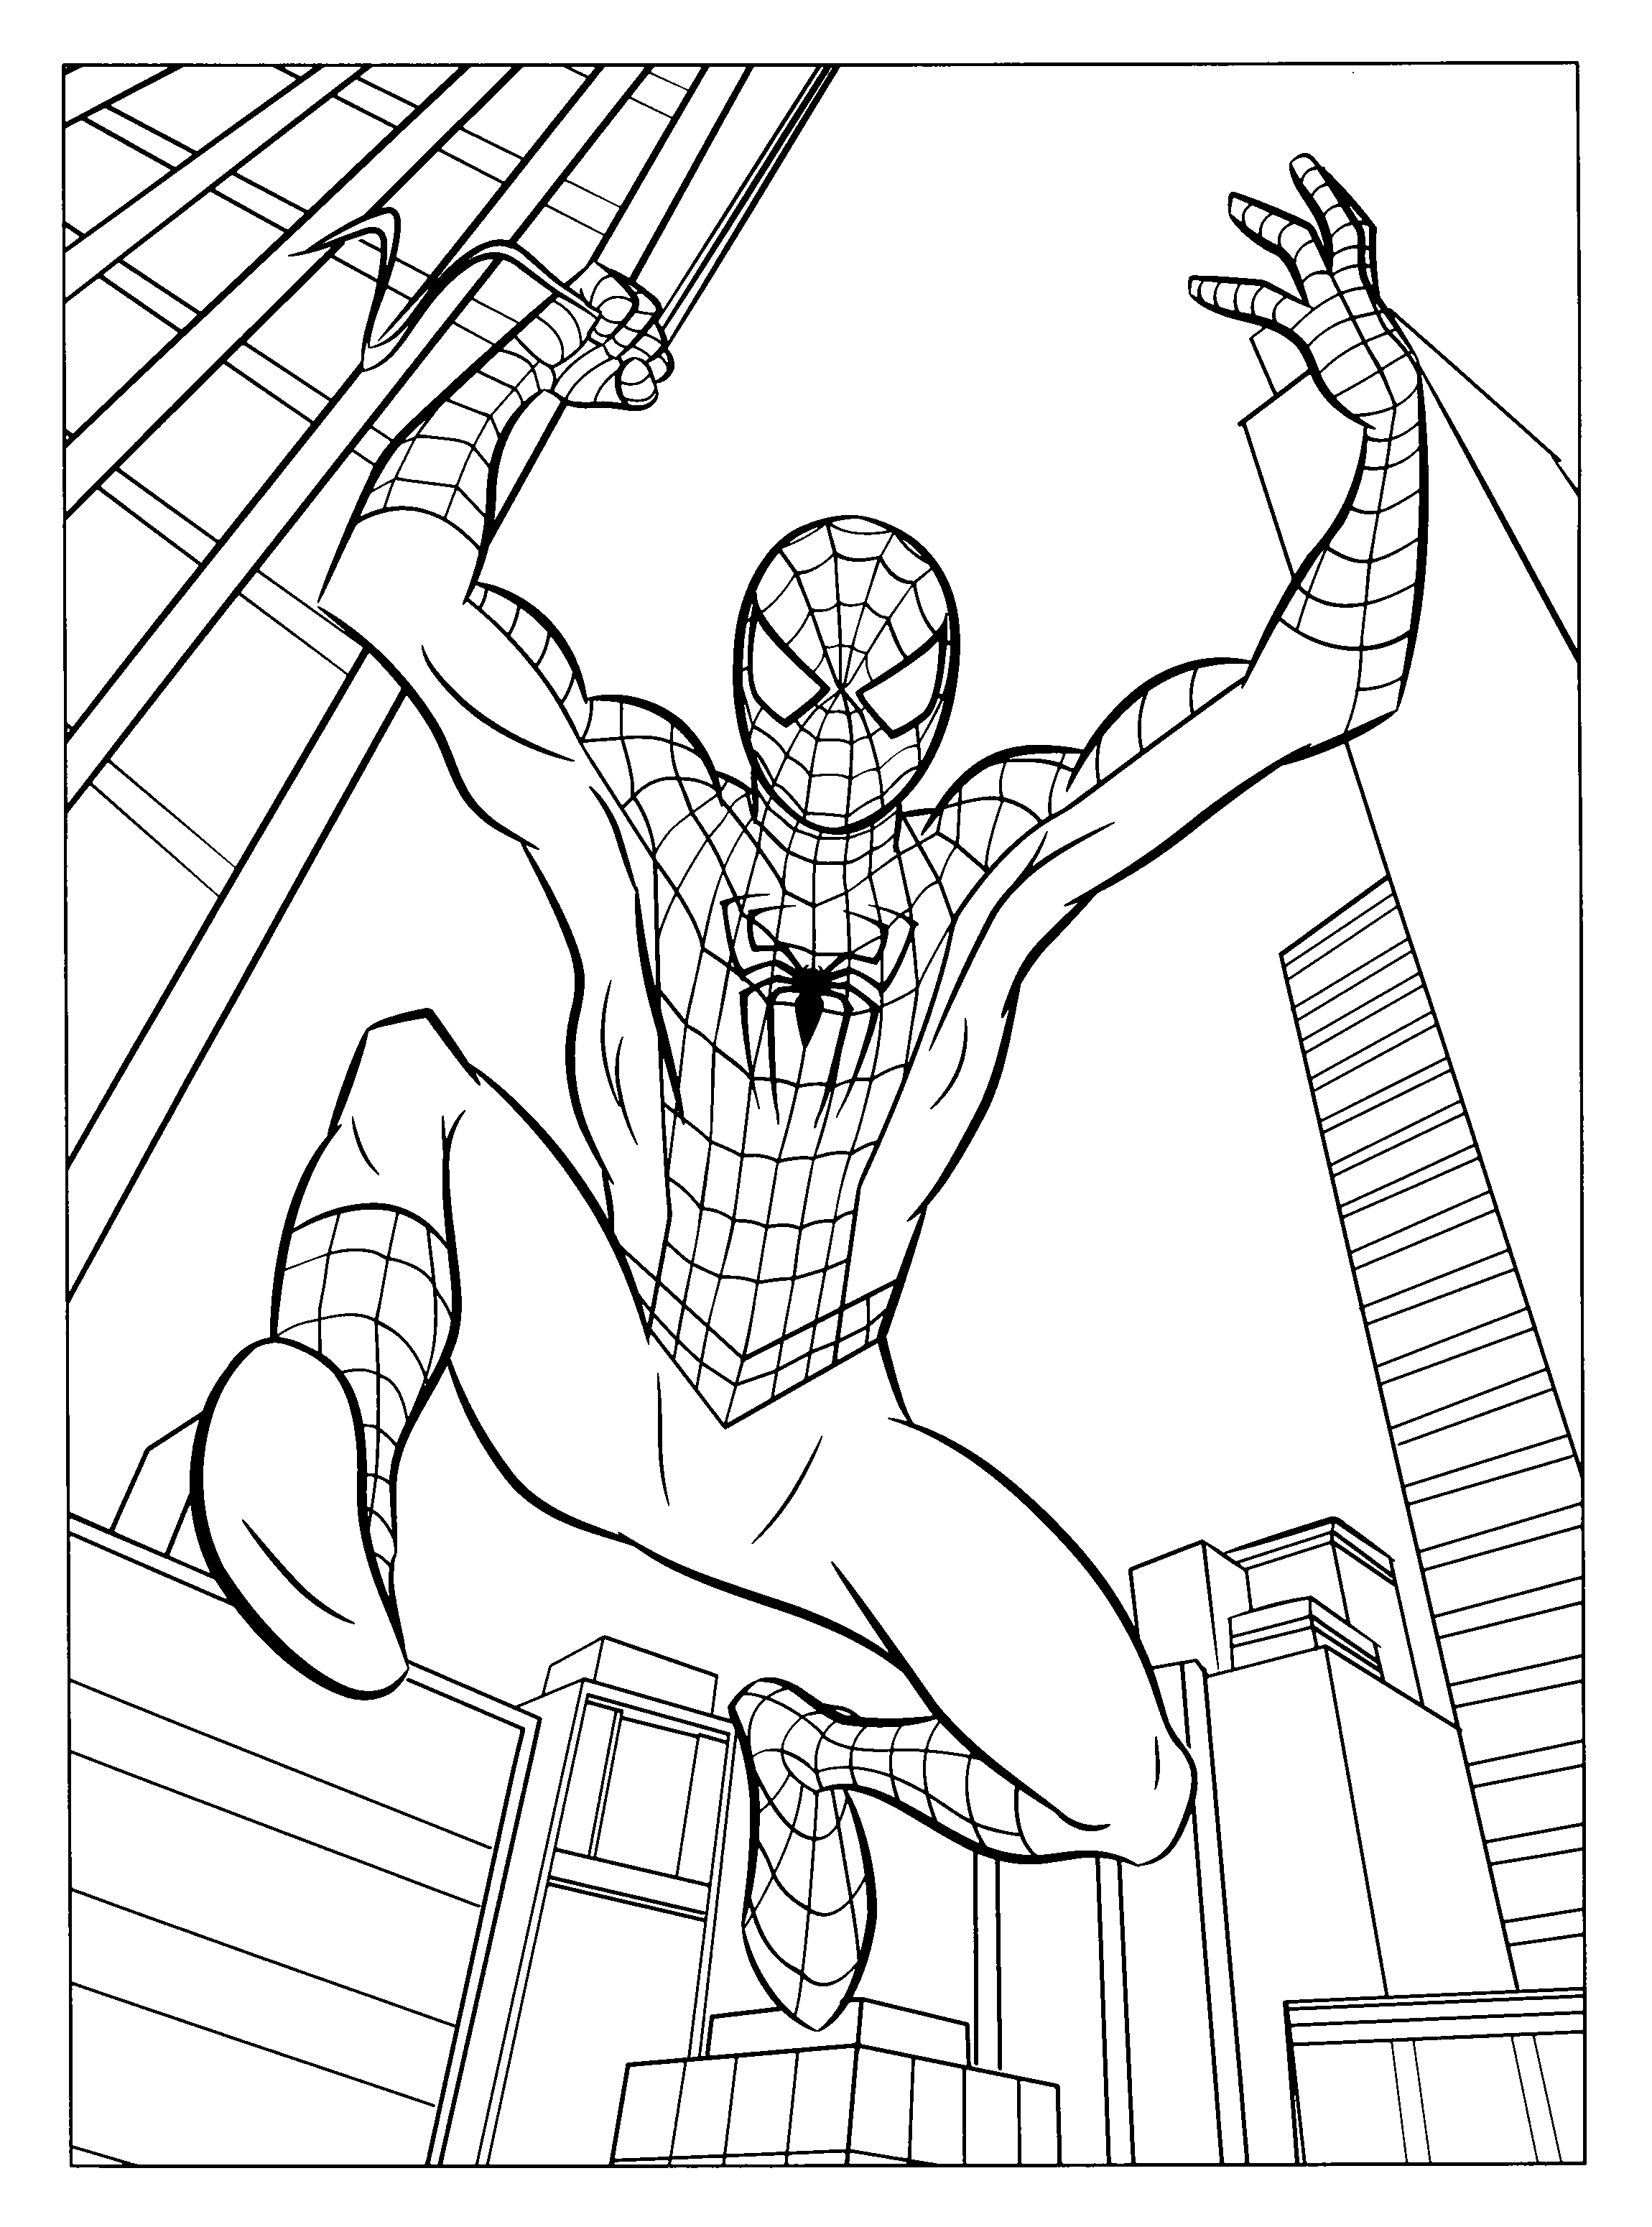 Image of Spiderman to download and color SpiderMan Kids Coloring Pages